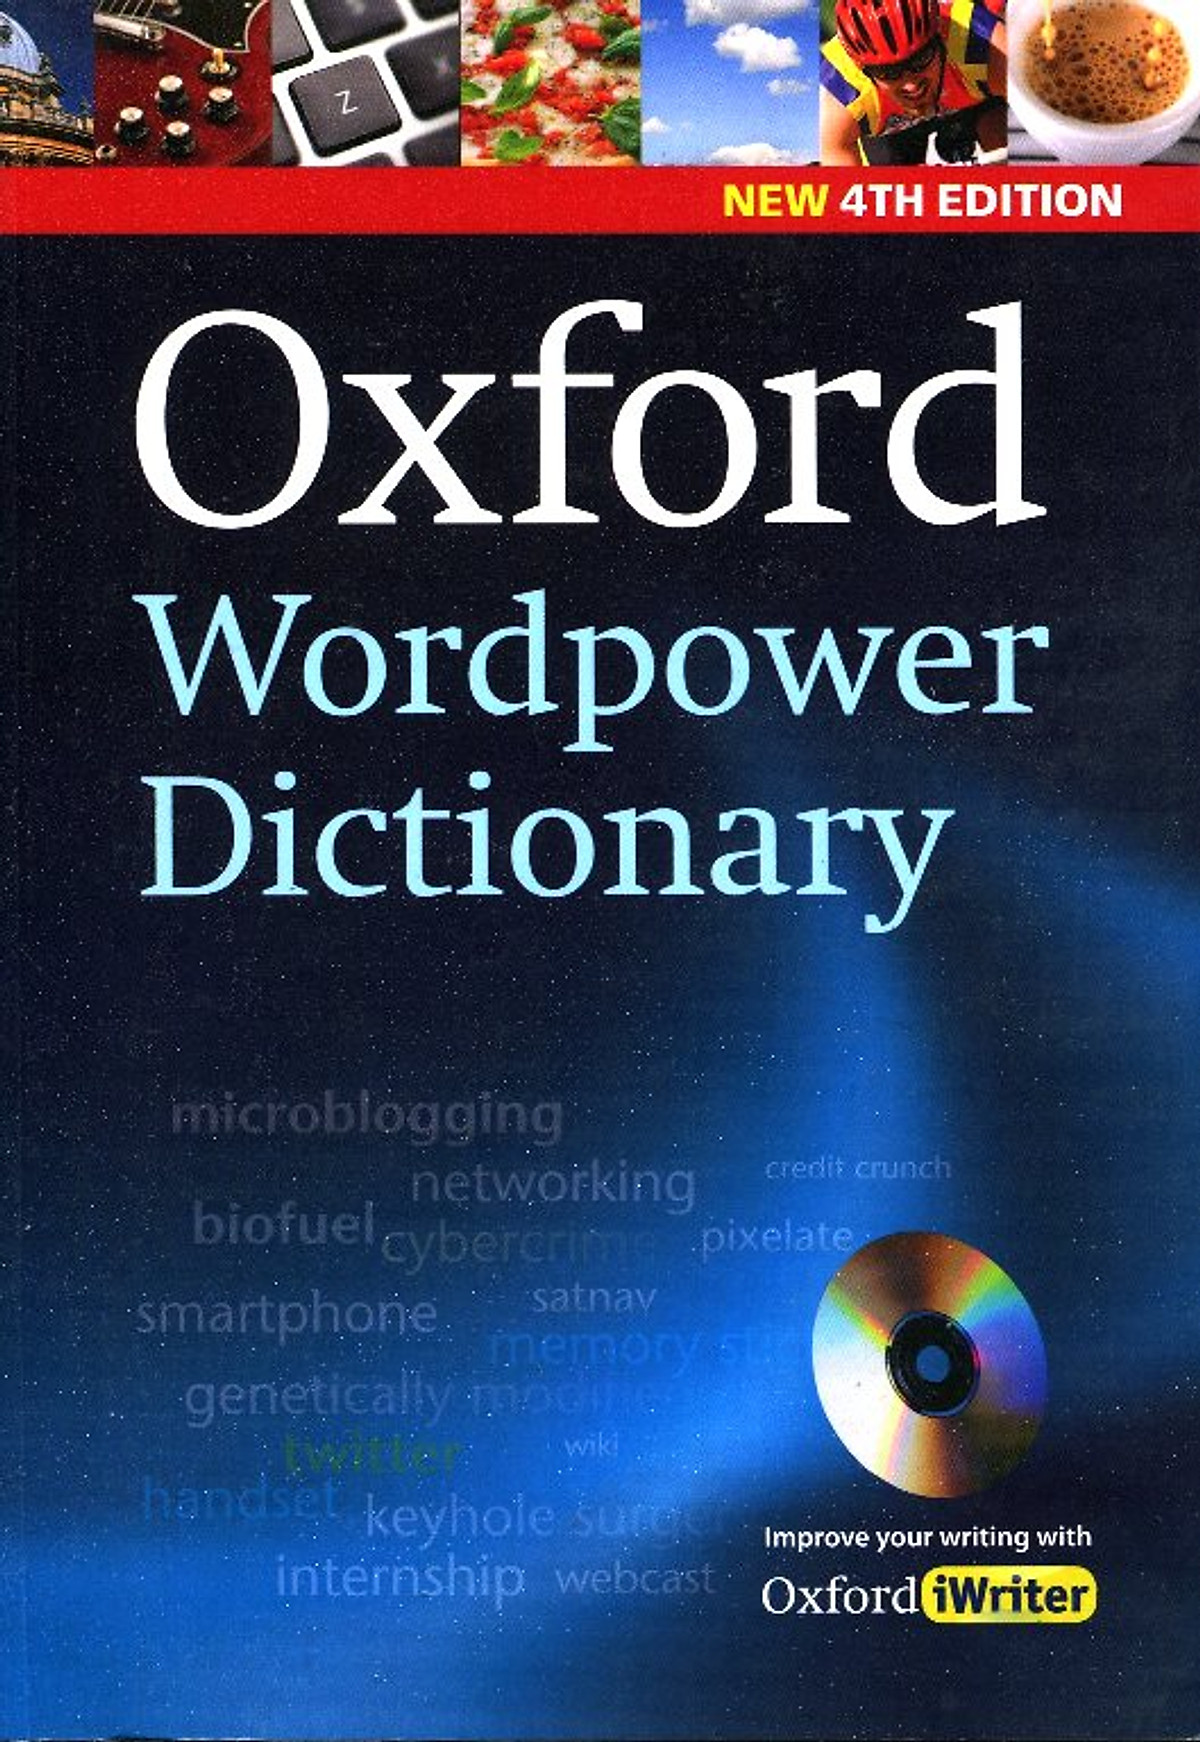 Oxford Wordpower Dictionary, 4th Edition Pack (With CD-ROM) 